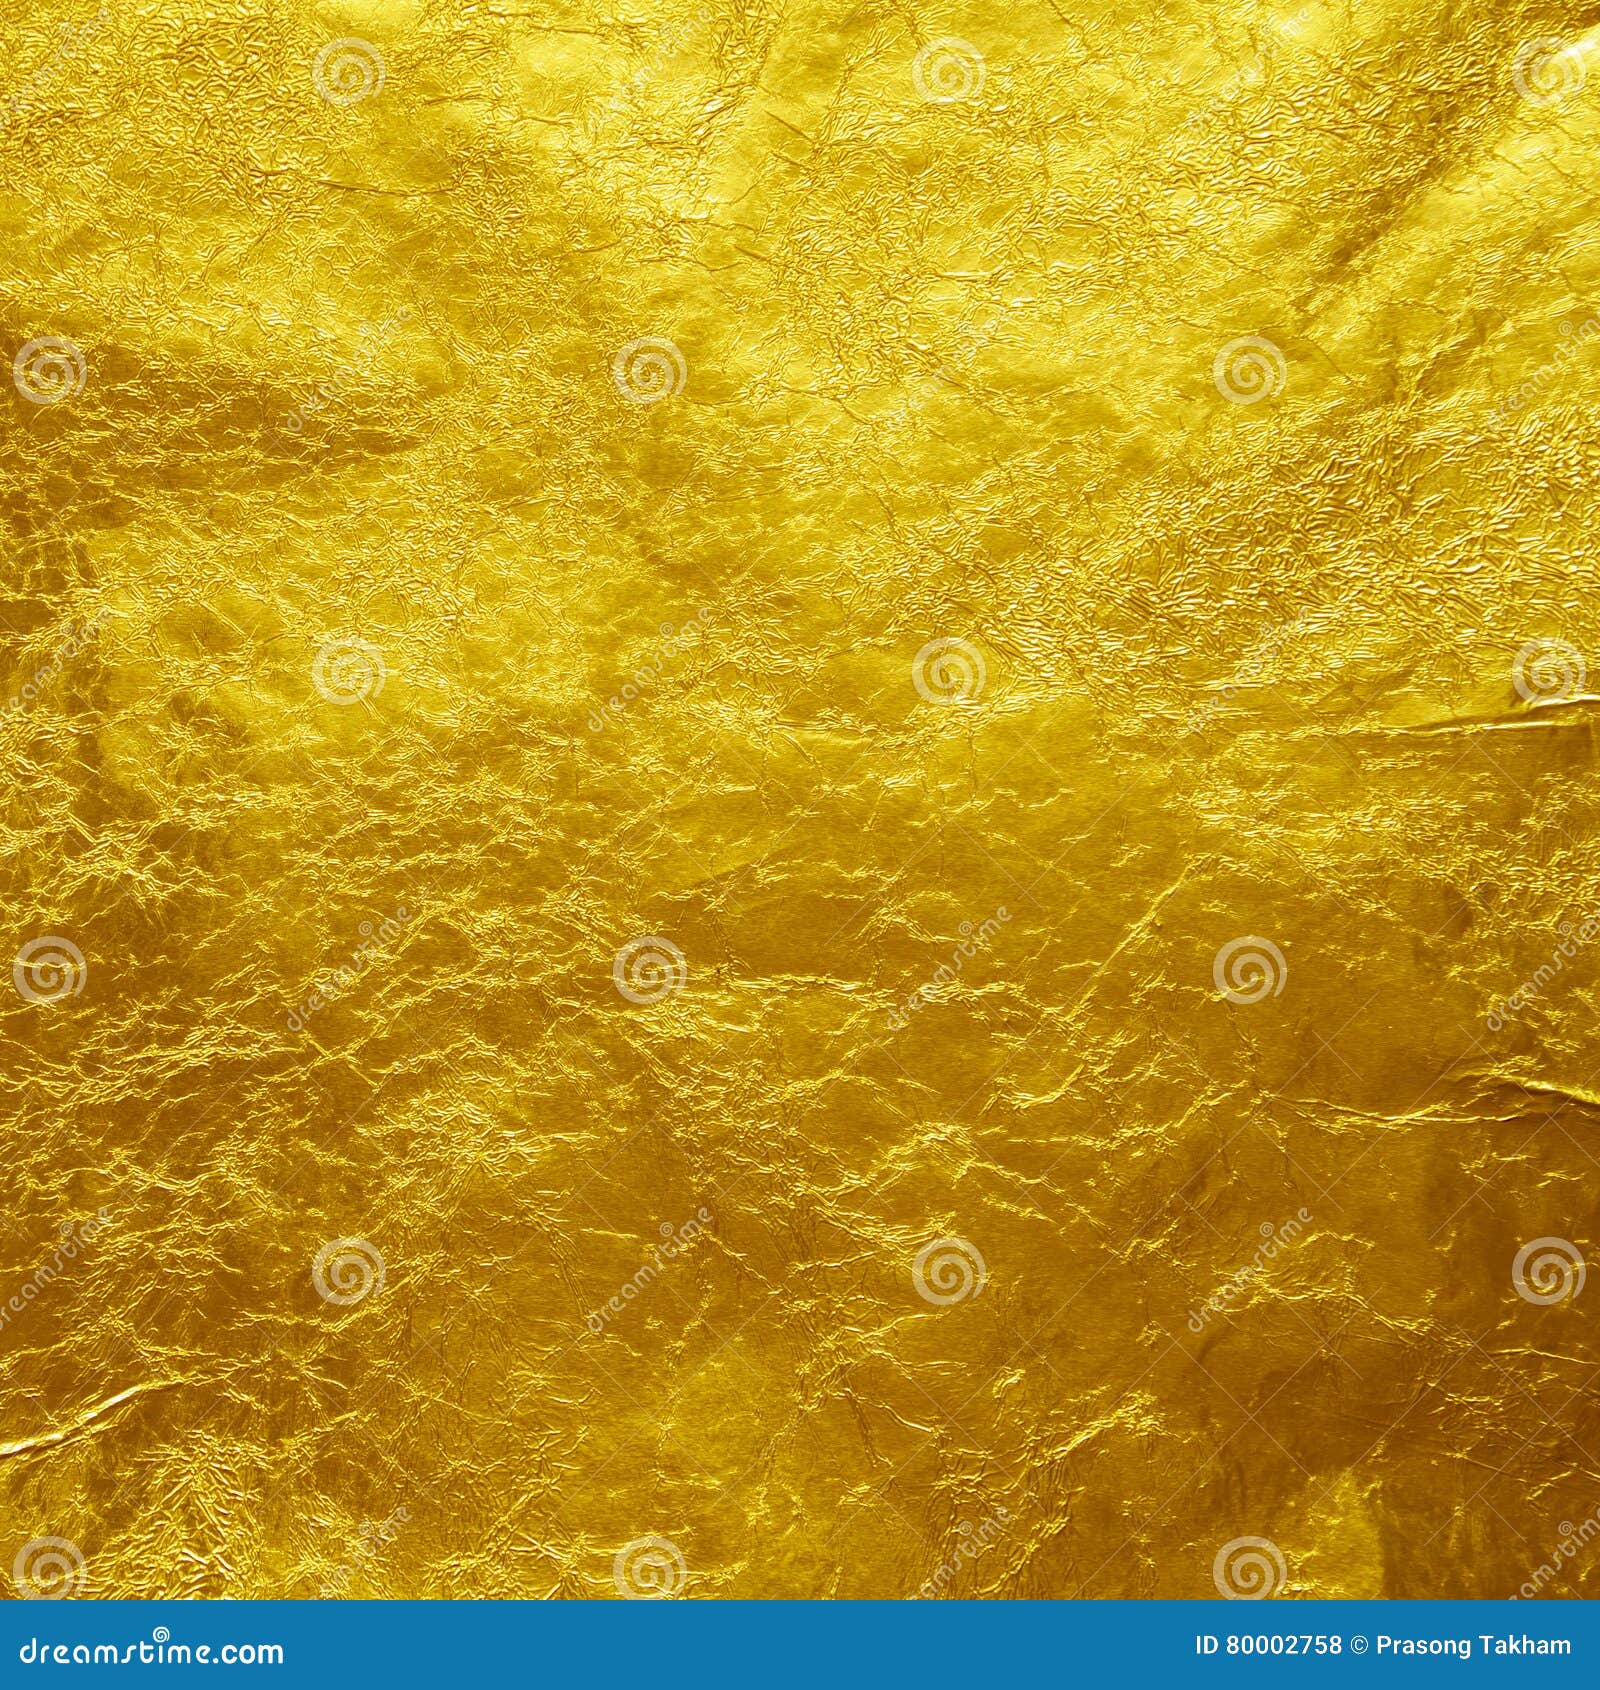 Gold Foil Texture Background Stock Photo, Picture and Royalty Free Image.  Image 65073600.